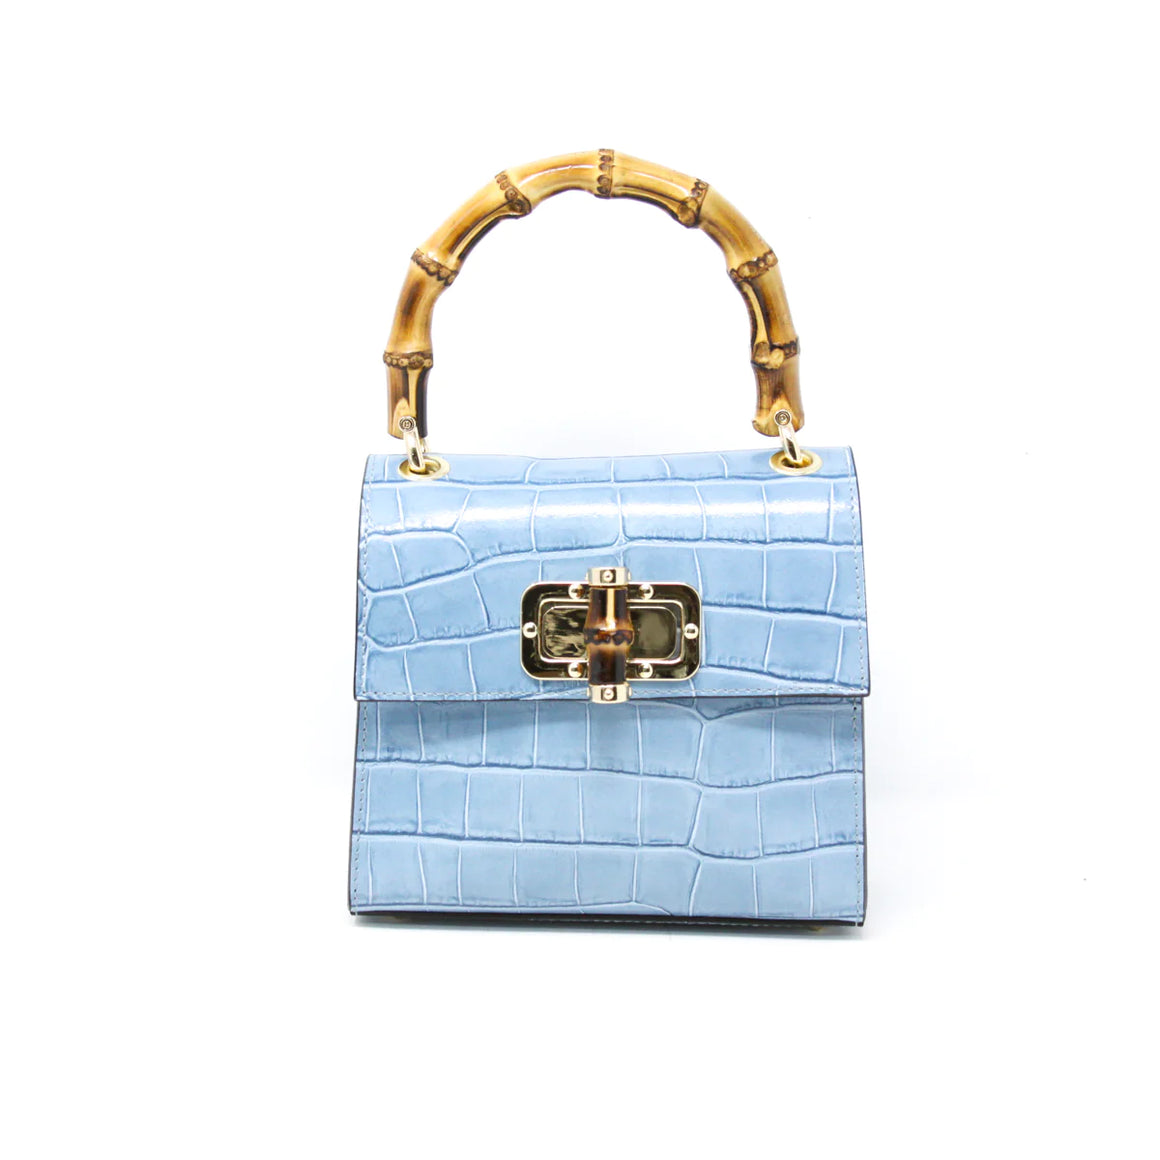 Germán Fuentes | Helen Leather Bag with Bamboo Handle